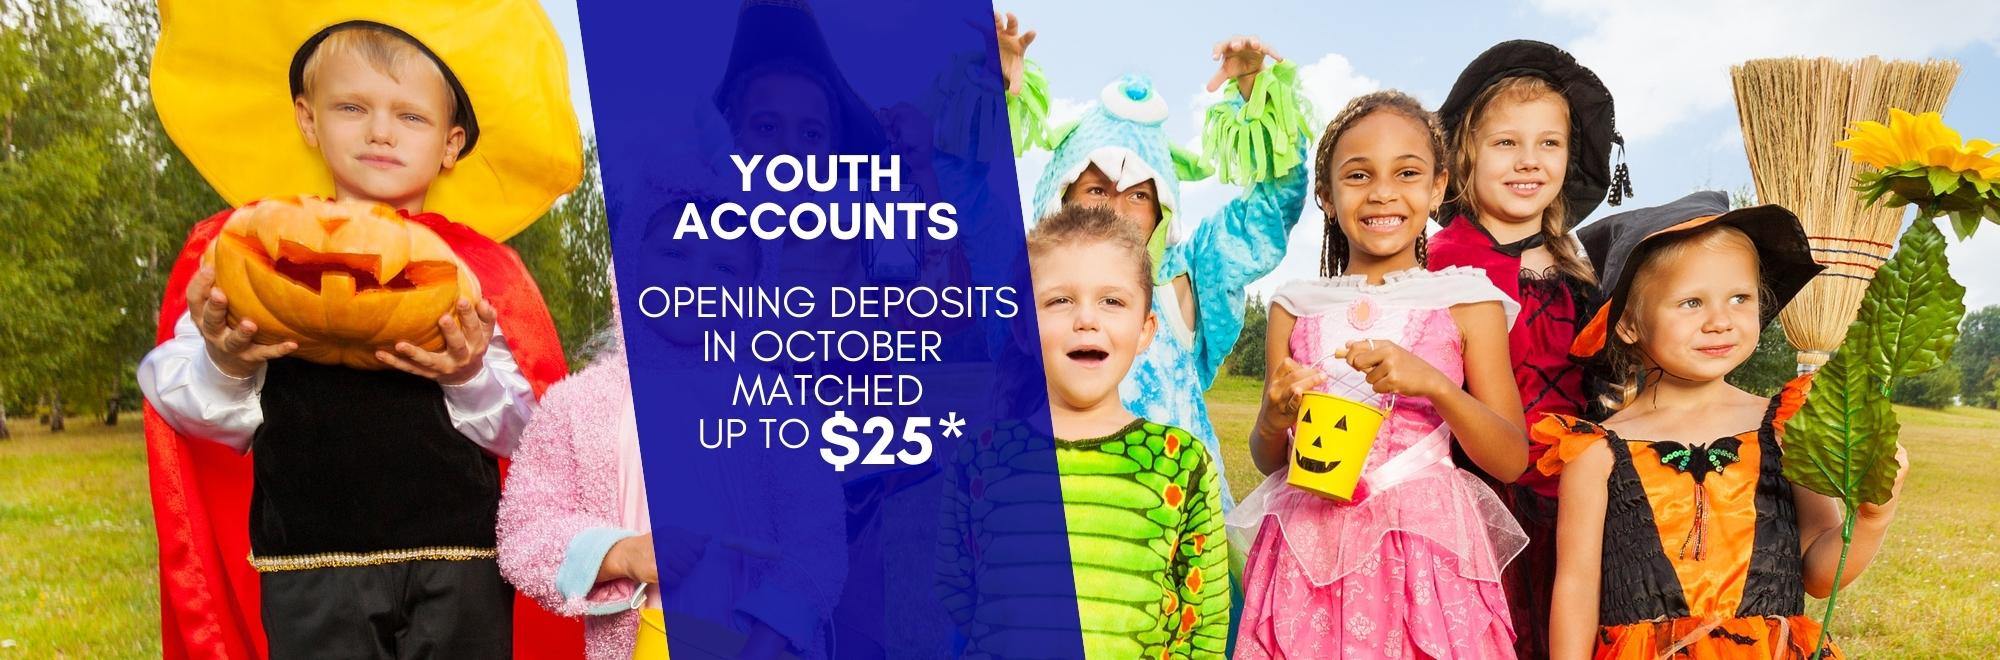 Youth Accounts Opening Deposits matched up to $25 click for details